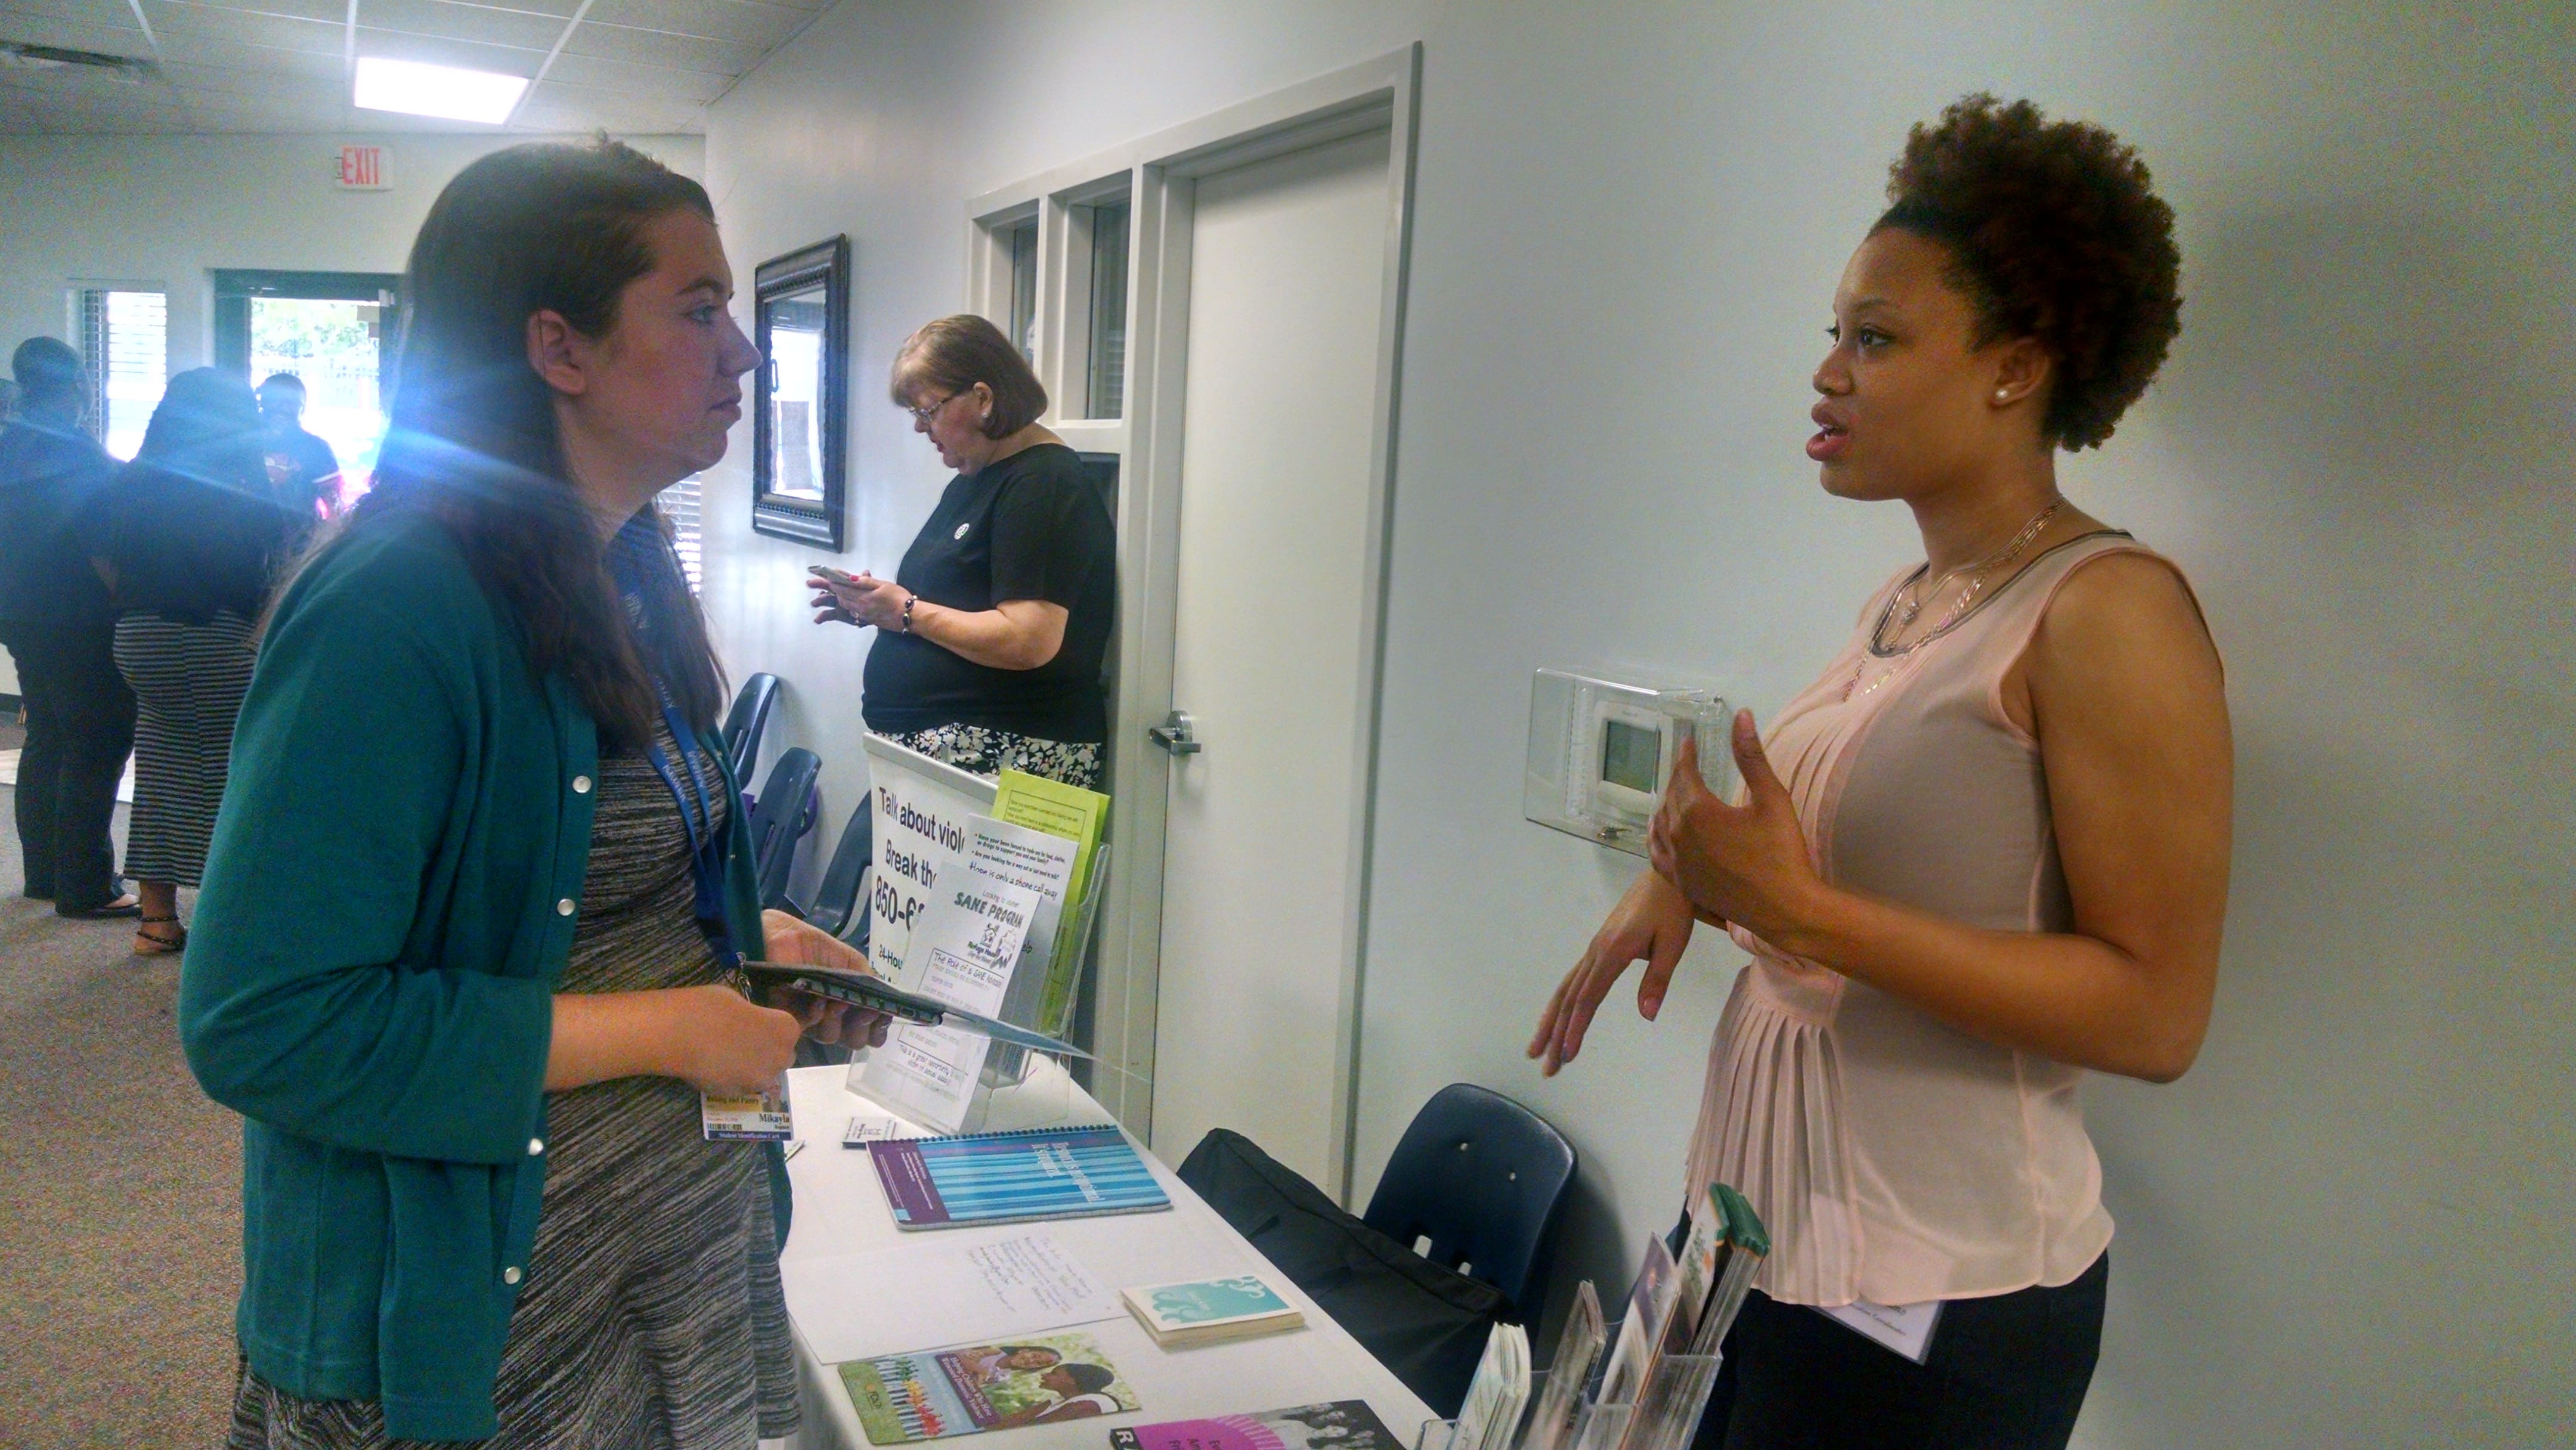 The Tallahassee Campus Hosts Community Resource Day